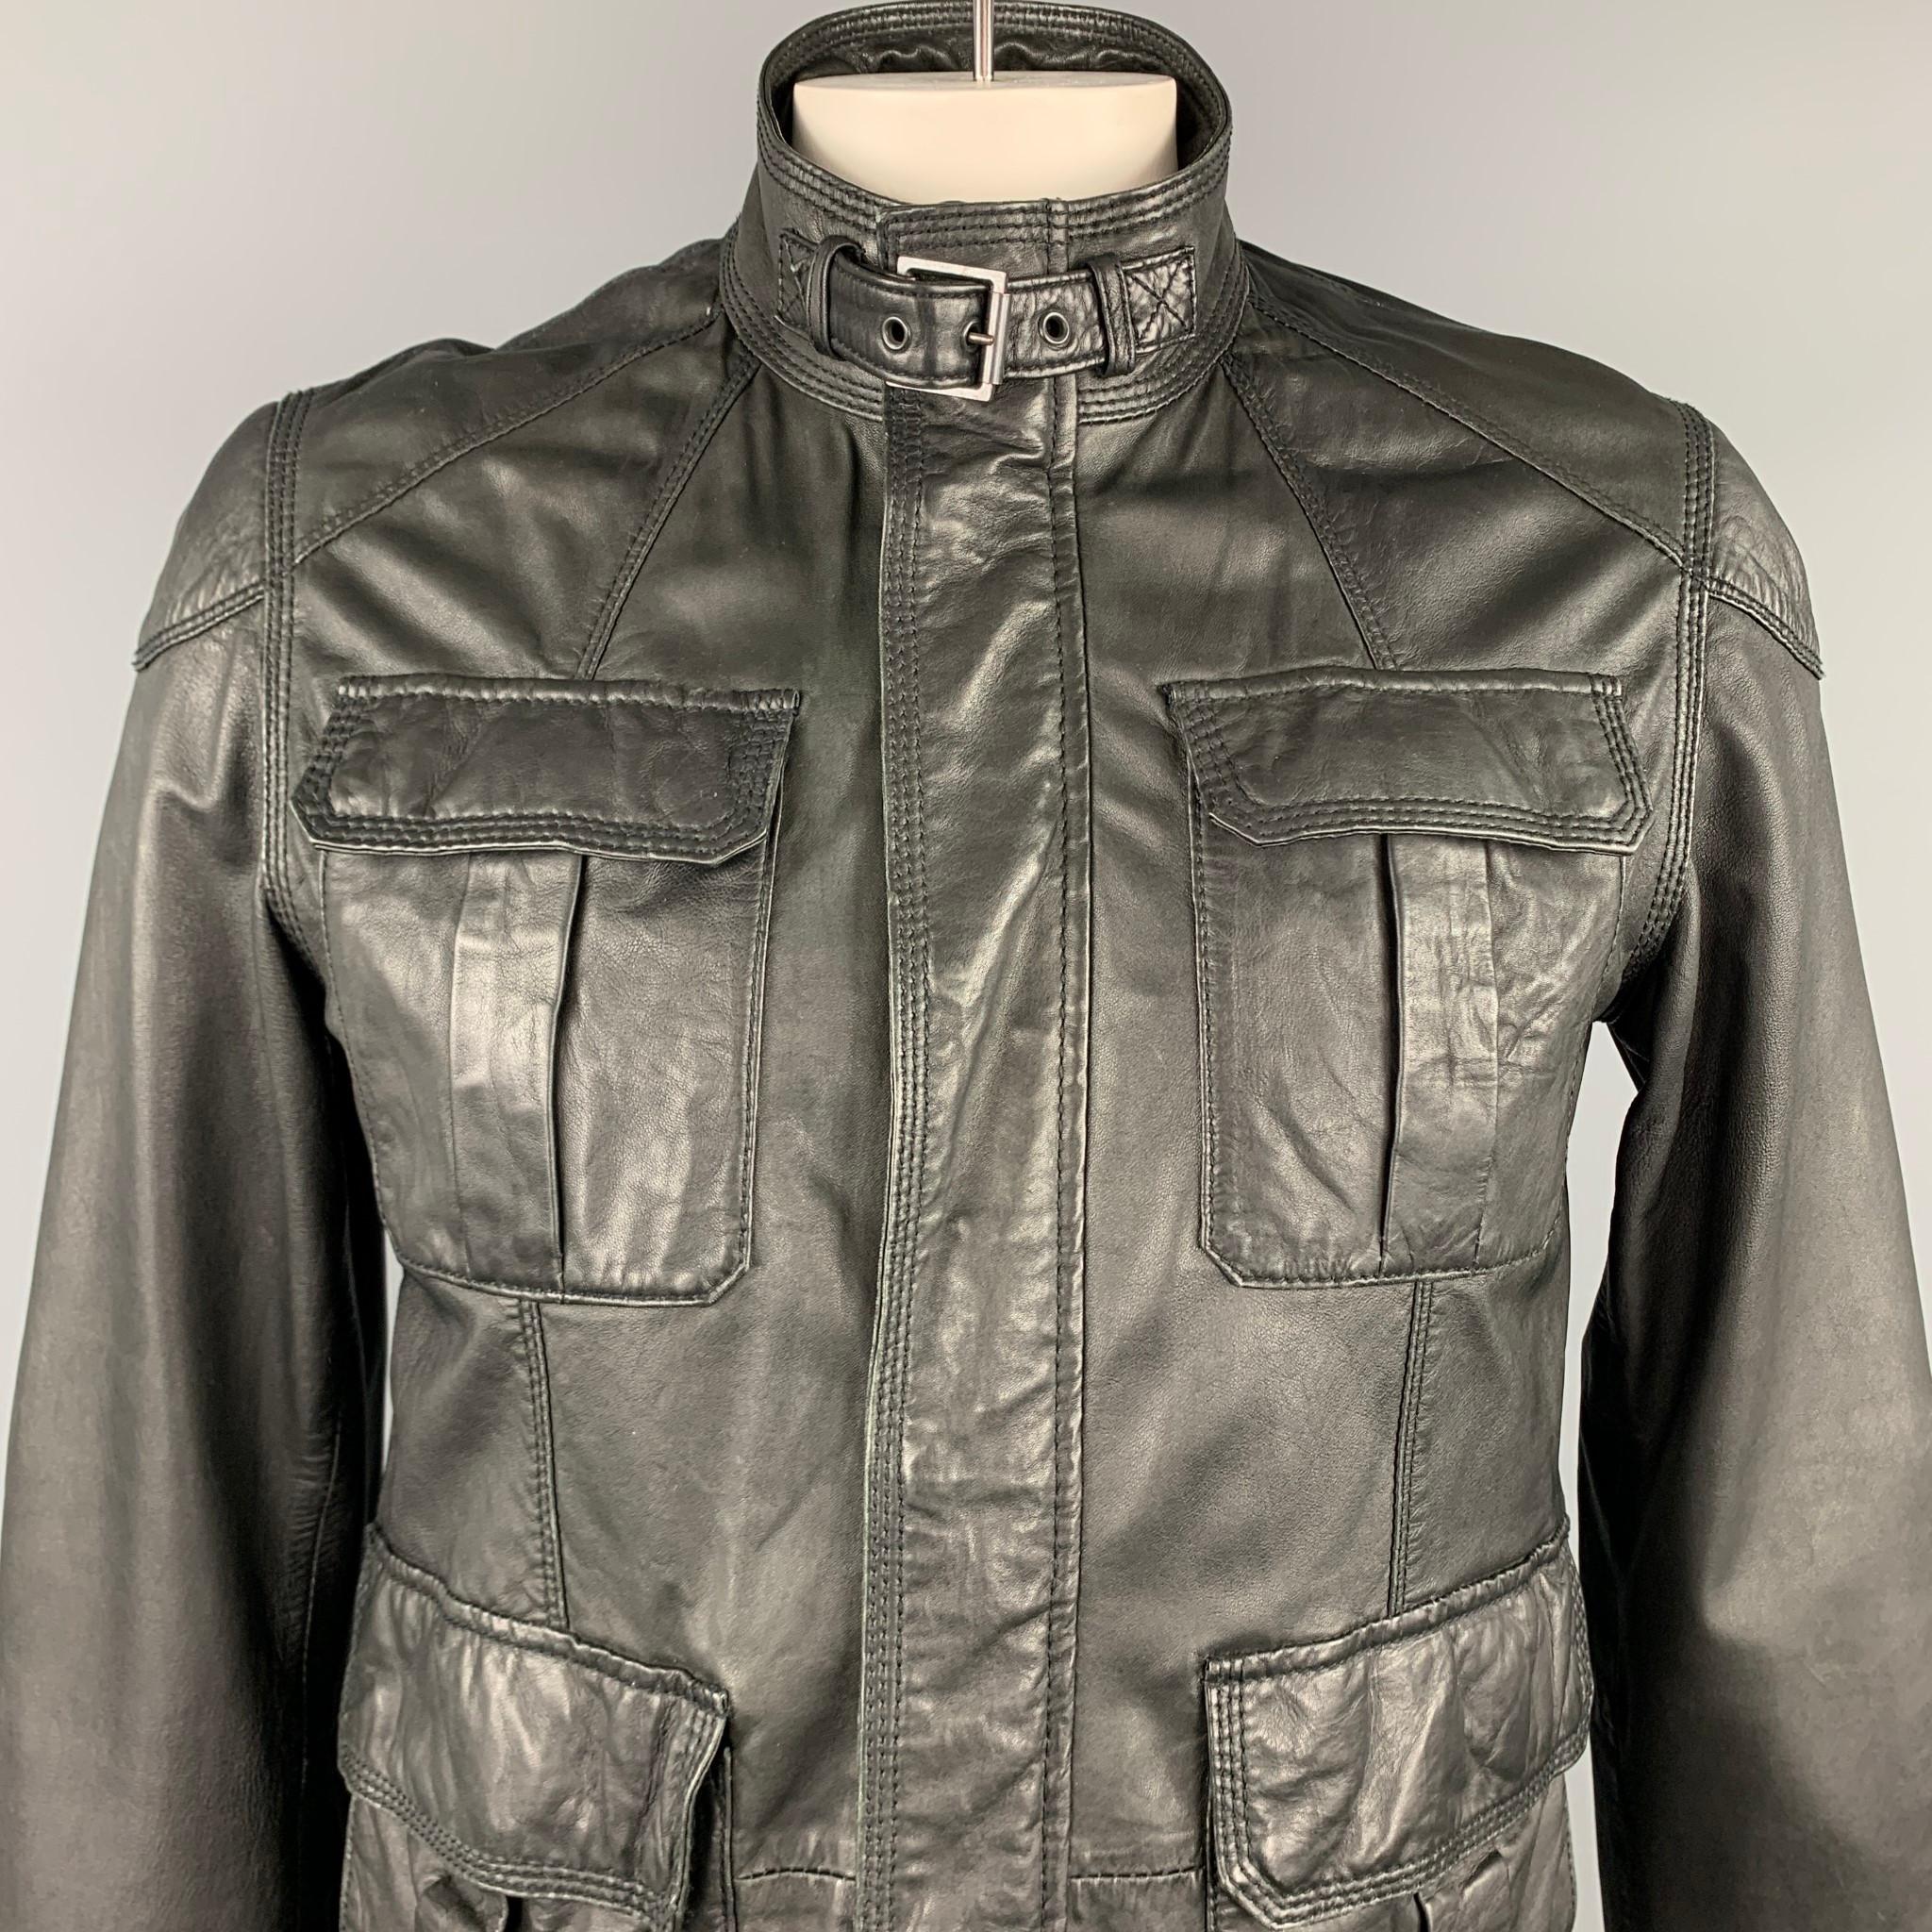 TED BAKER jacket comes in a black leather with a full liner featuring a belted strap collar, patch pockets, and a zip & snap button closure.

Very Good Pre-Owned Condition.
Marked: 4

Measurements:

Shoulder: 18 in.
Chest: 42 in.
Sleeve: 27.5